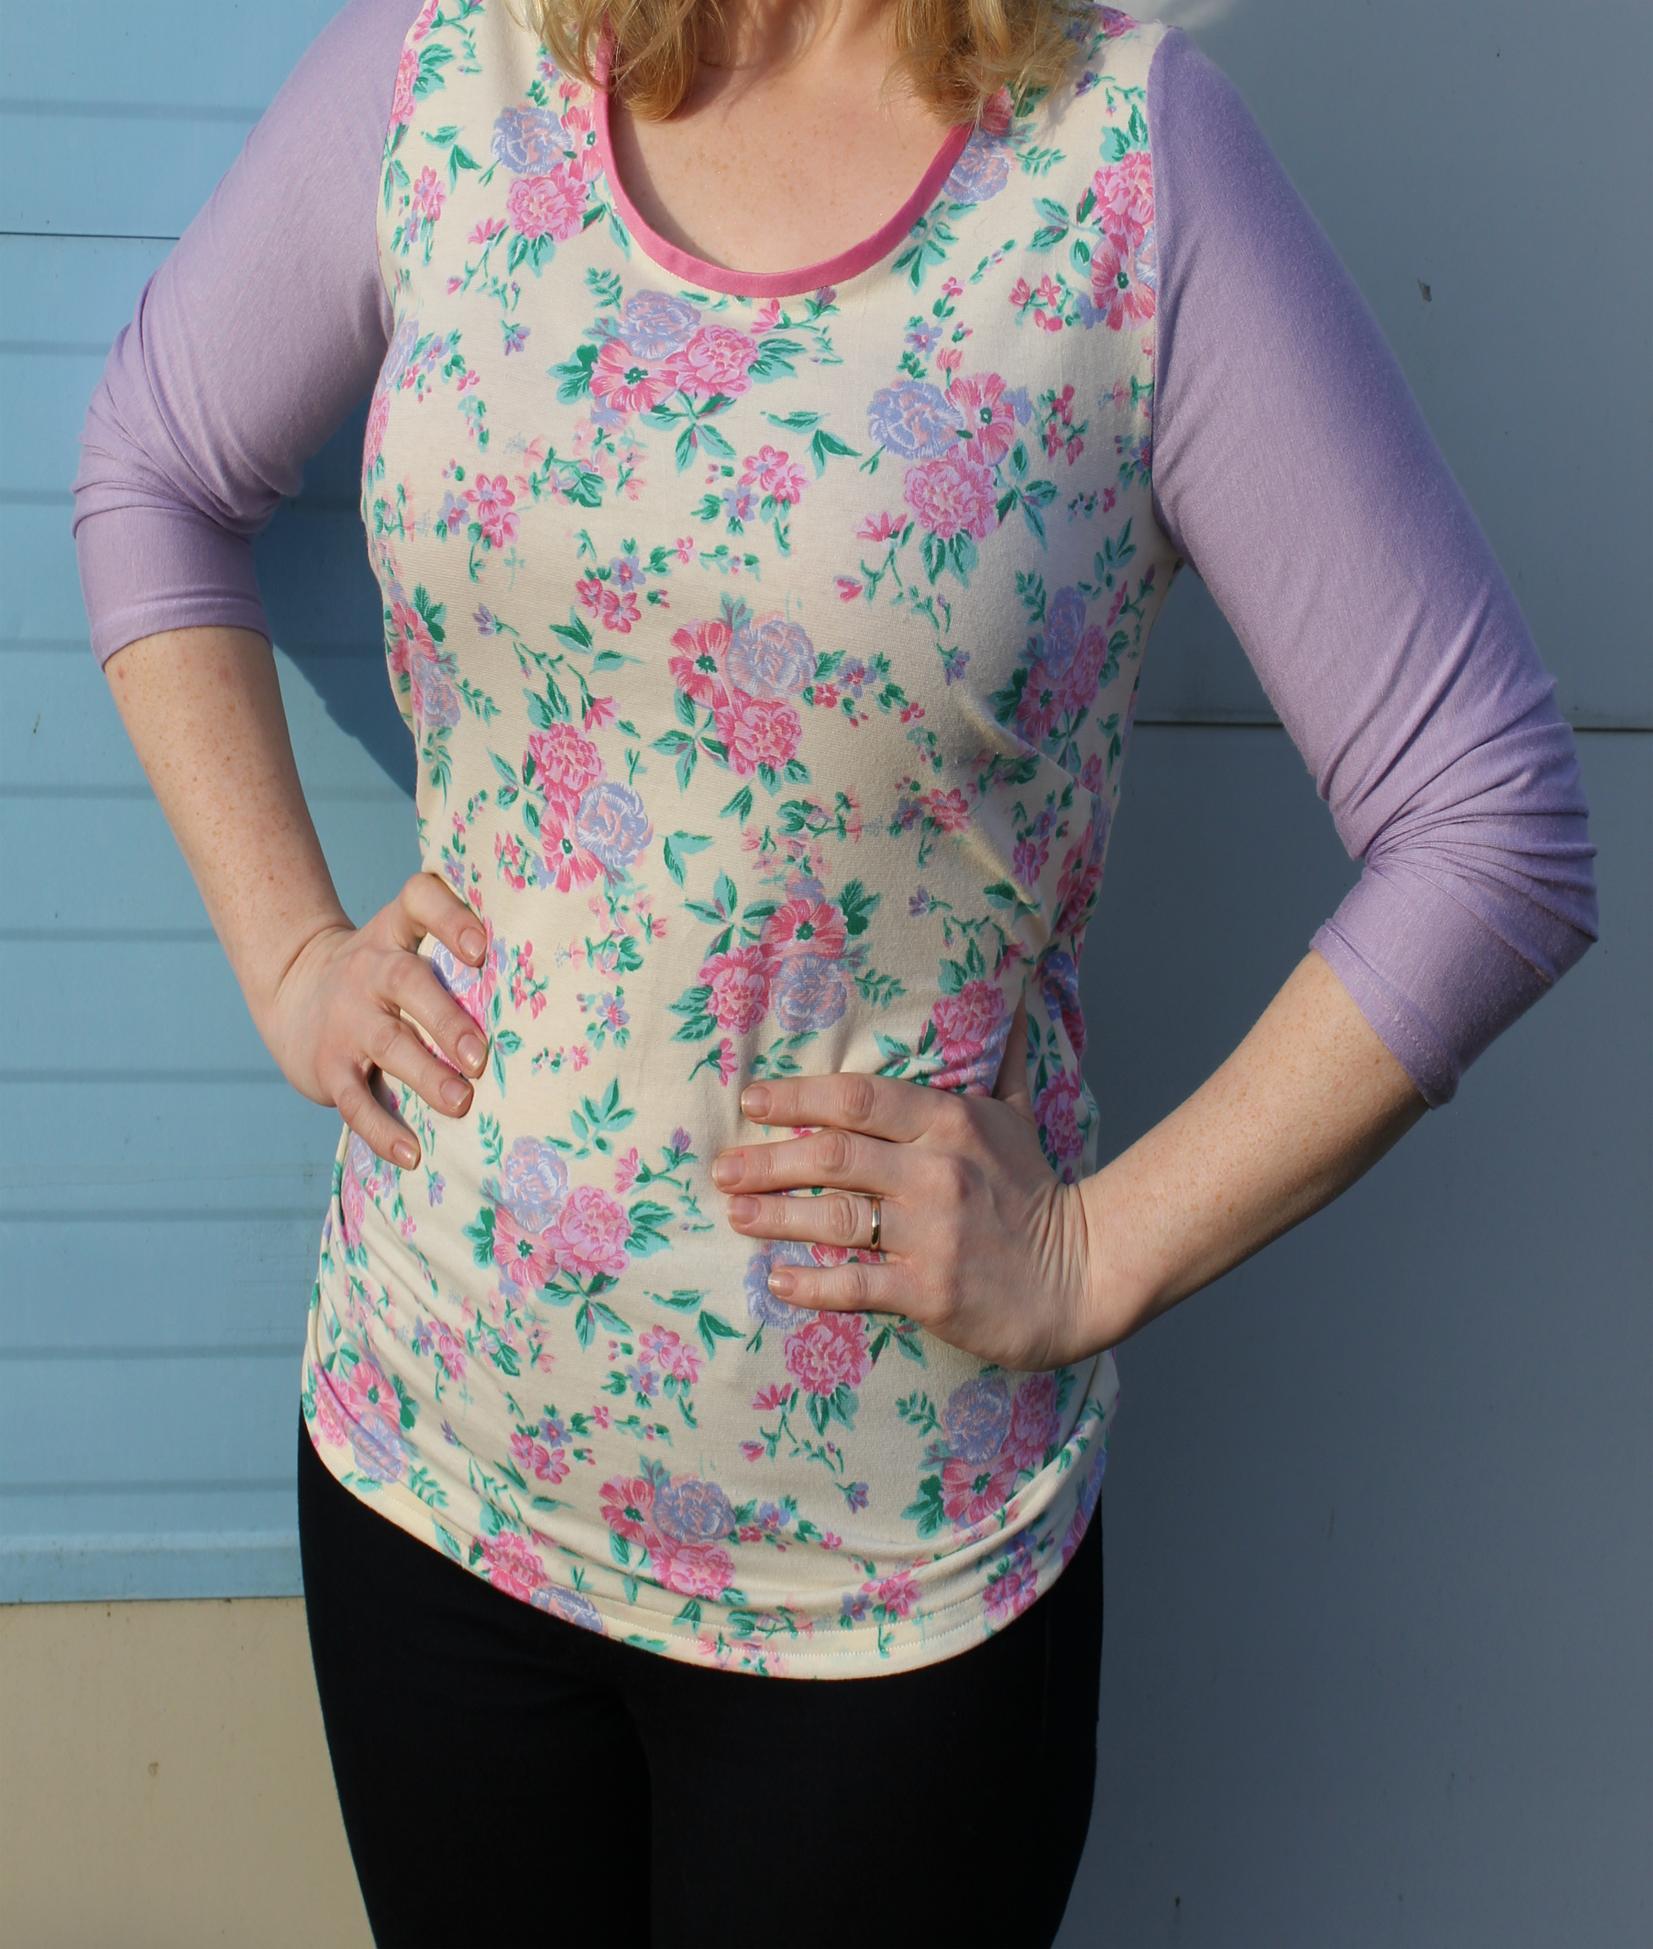 DIY summer top sewing project